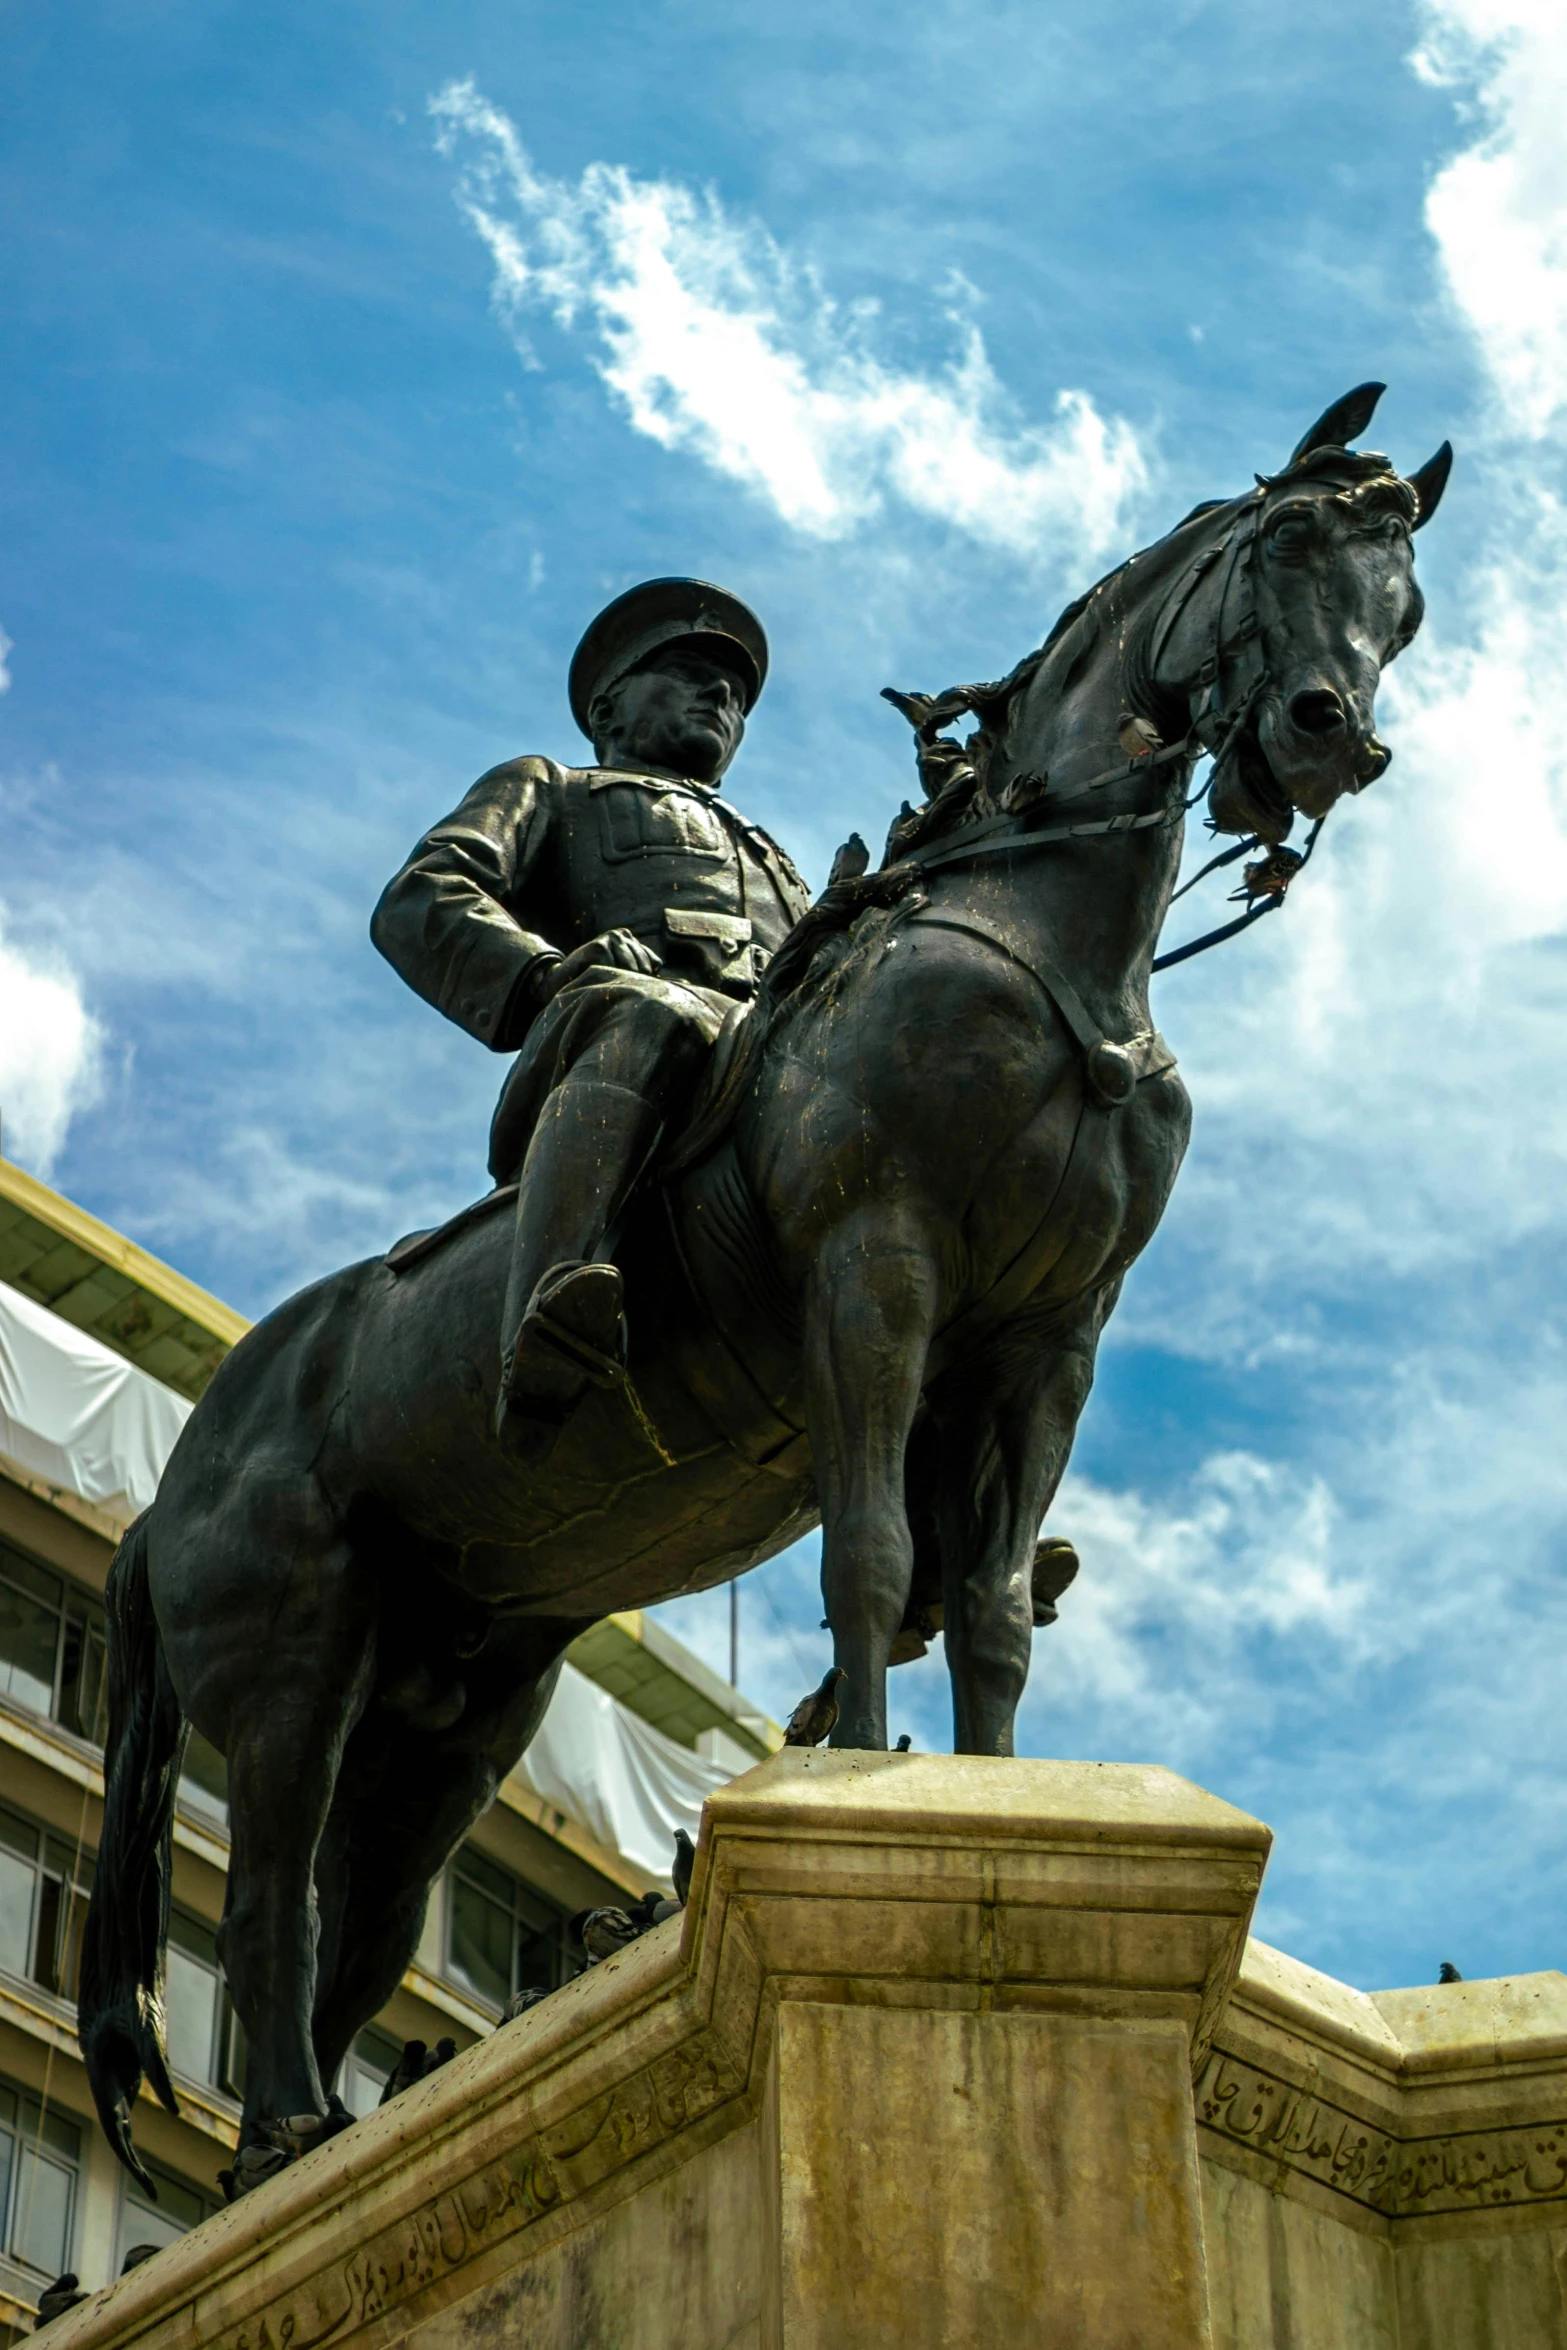 a statue of a man on top of a horse